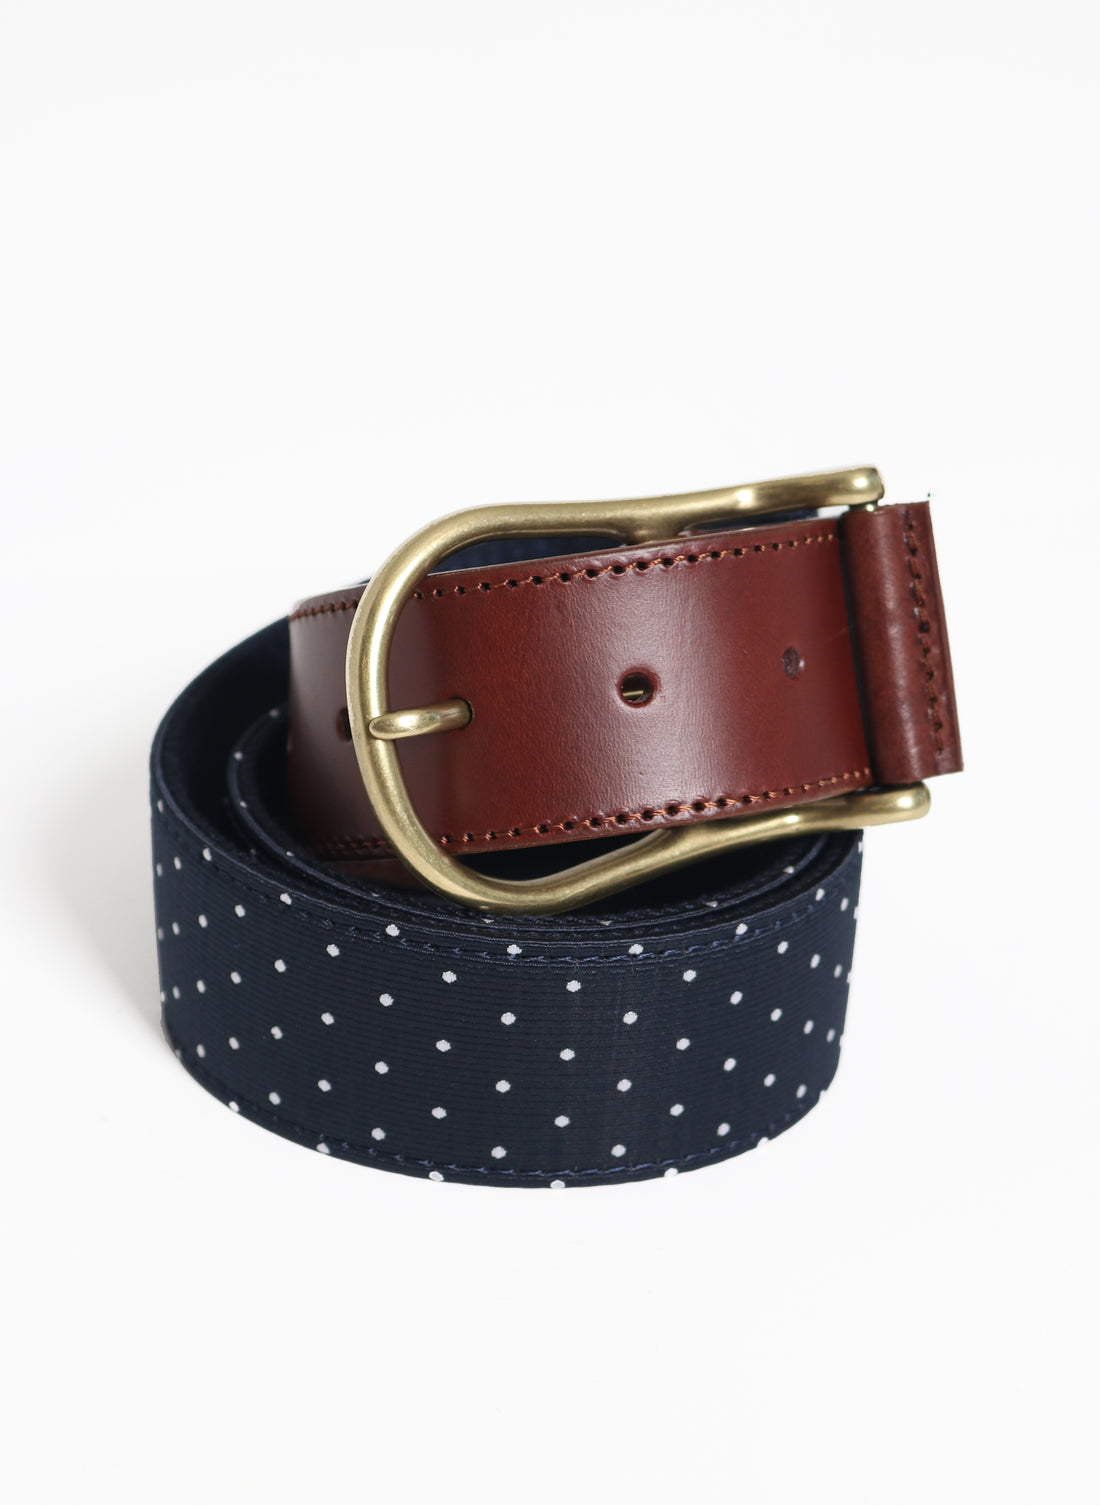 Blue Belt with White Polka Dots